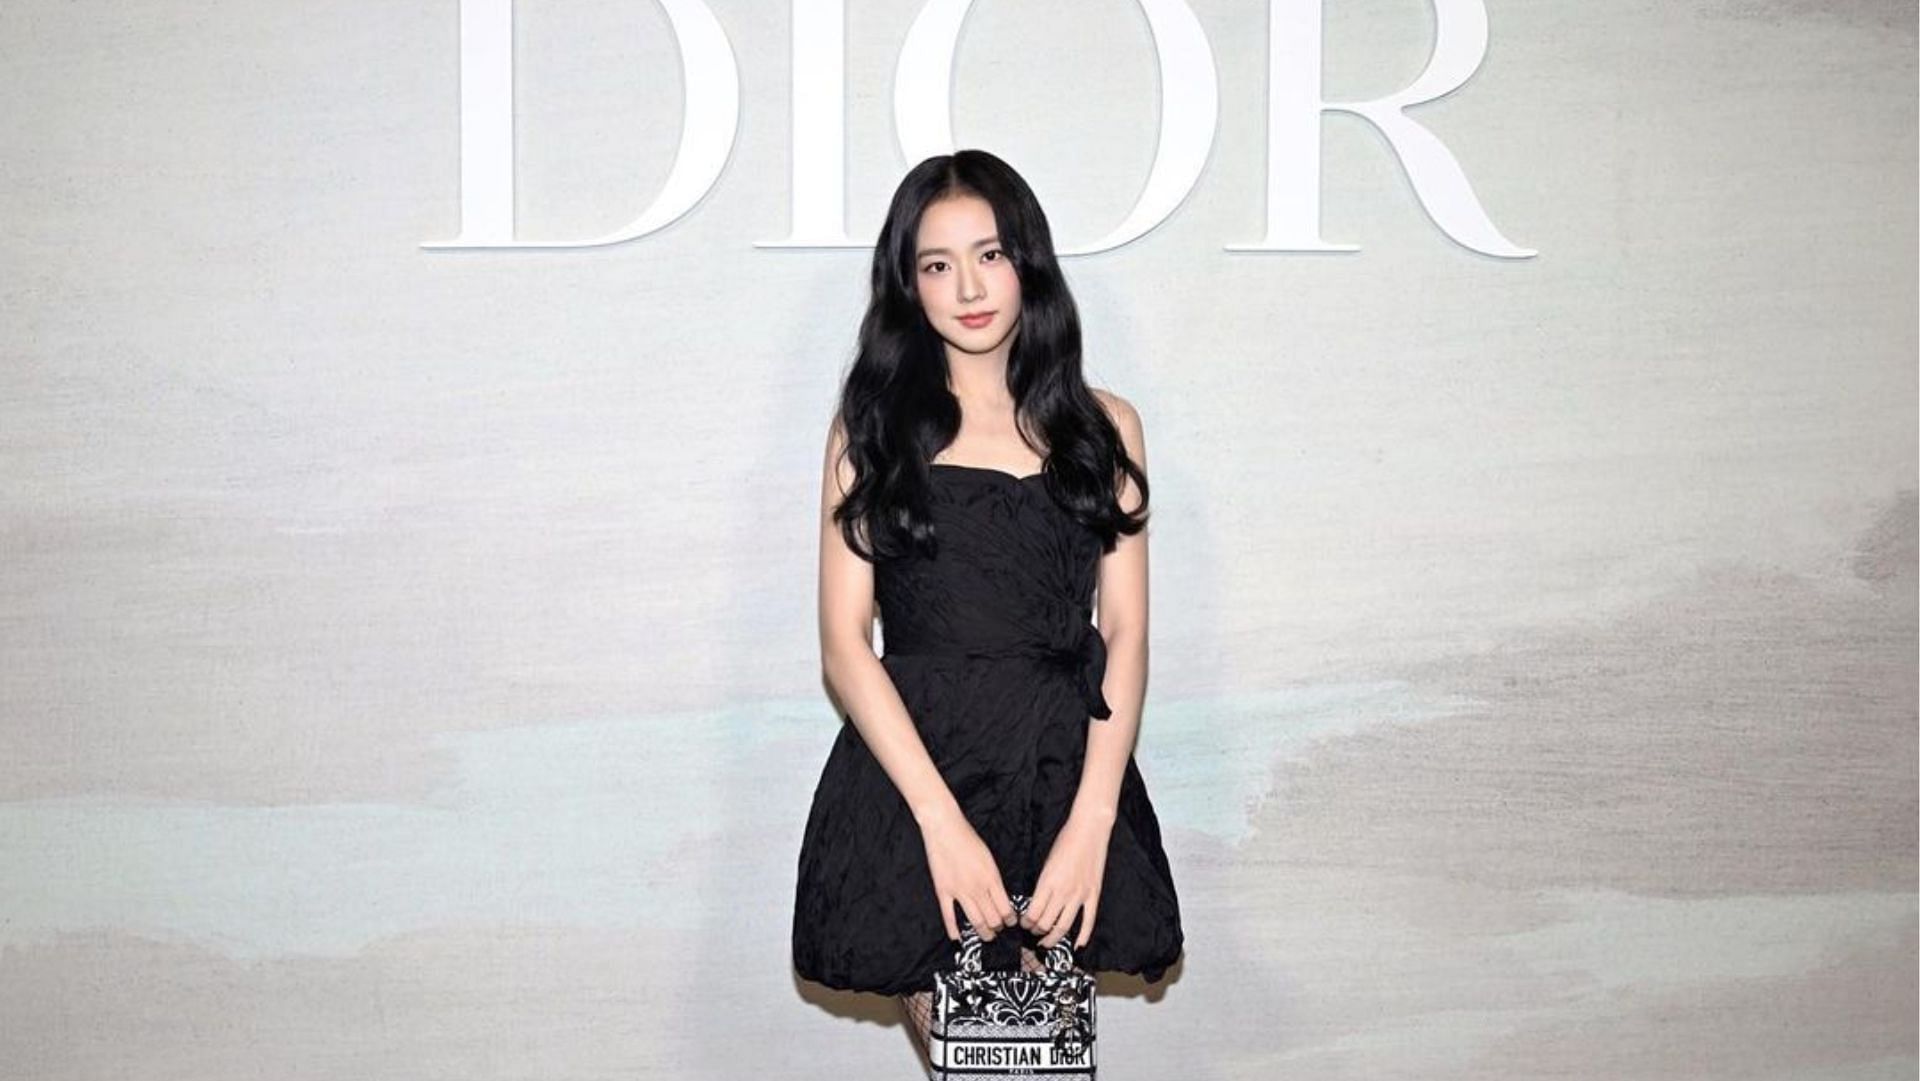 Jisoo at Dior. Who are the people to her left and right? : r/BeulPing